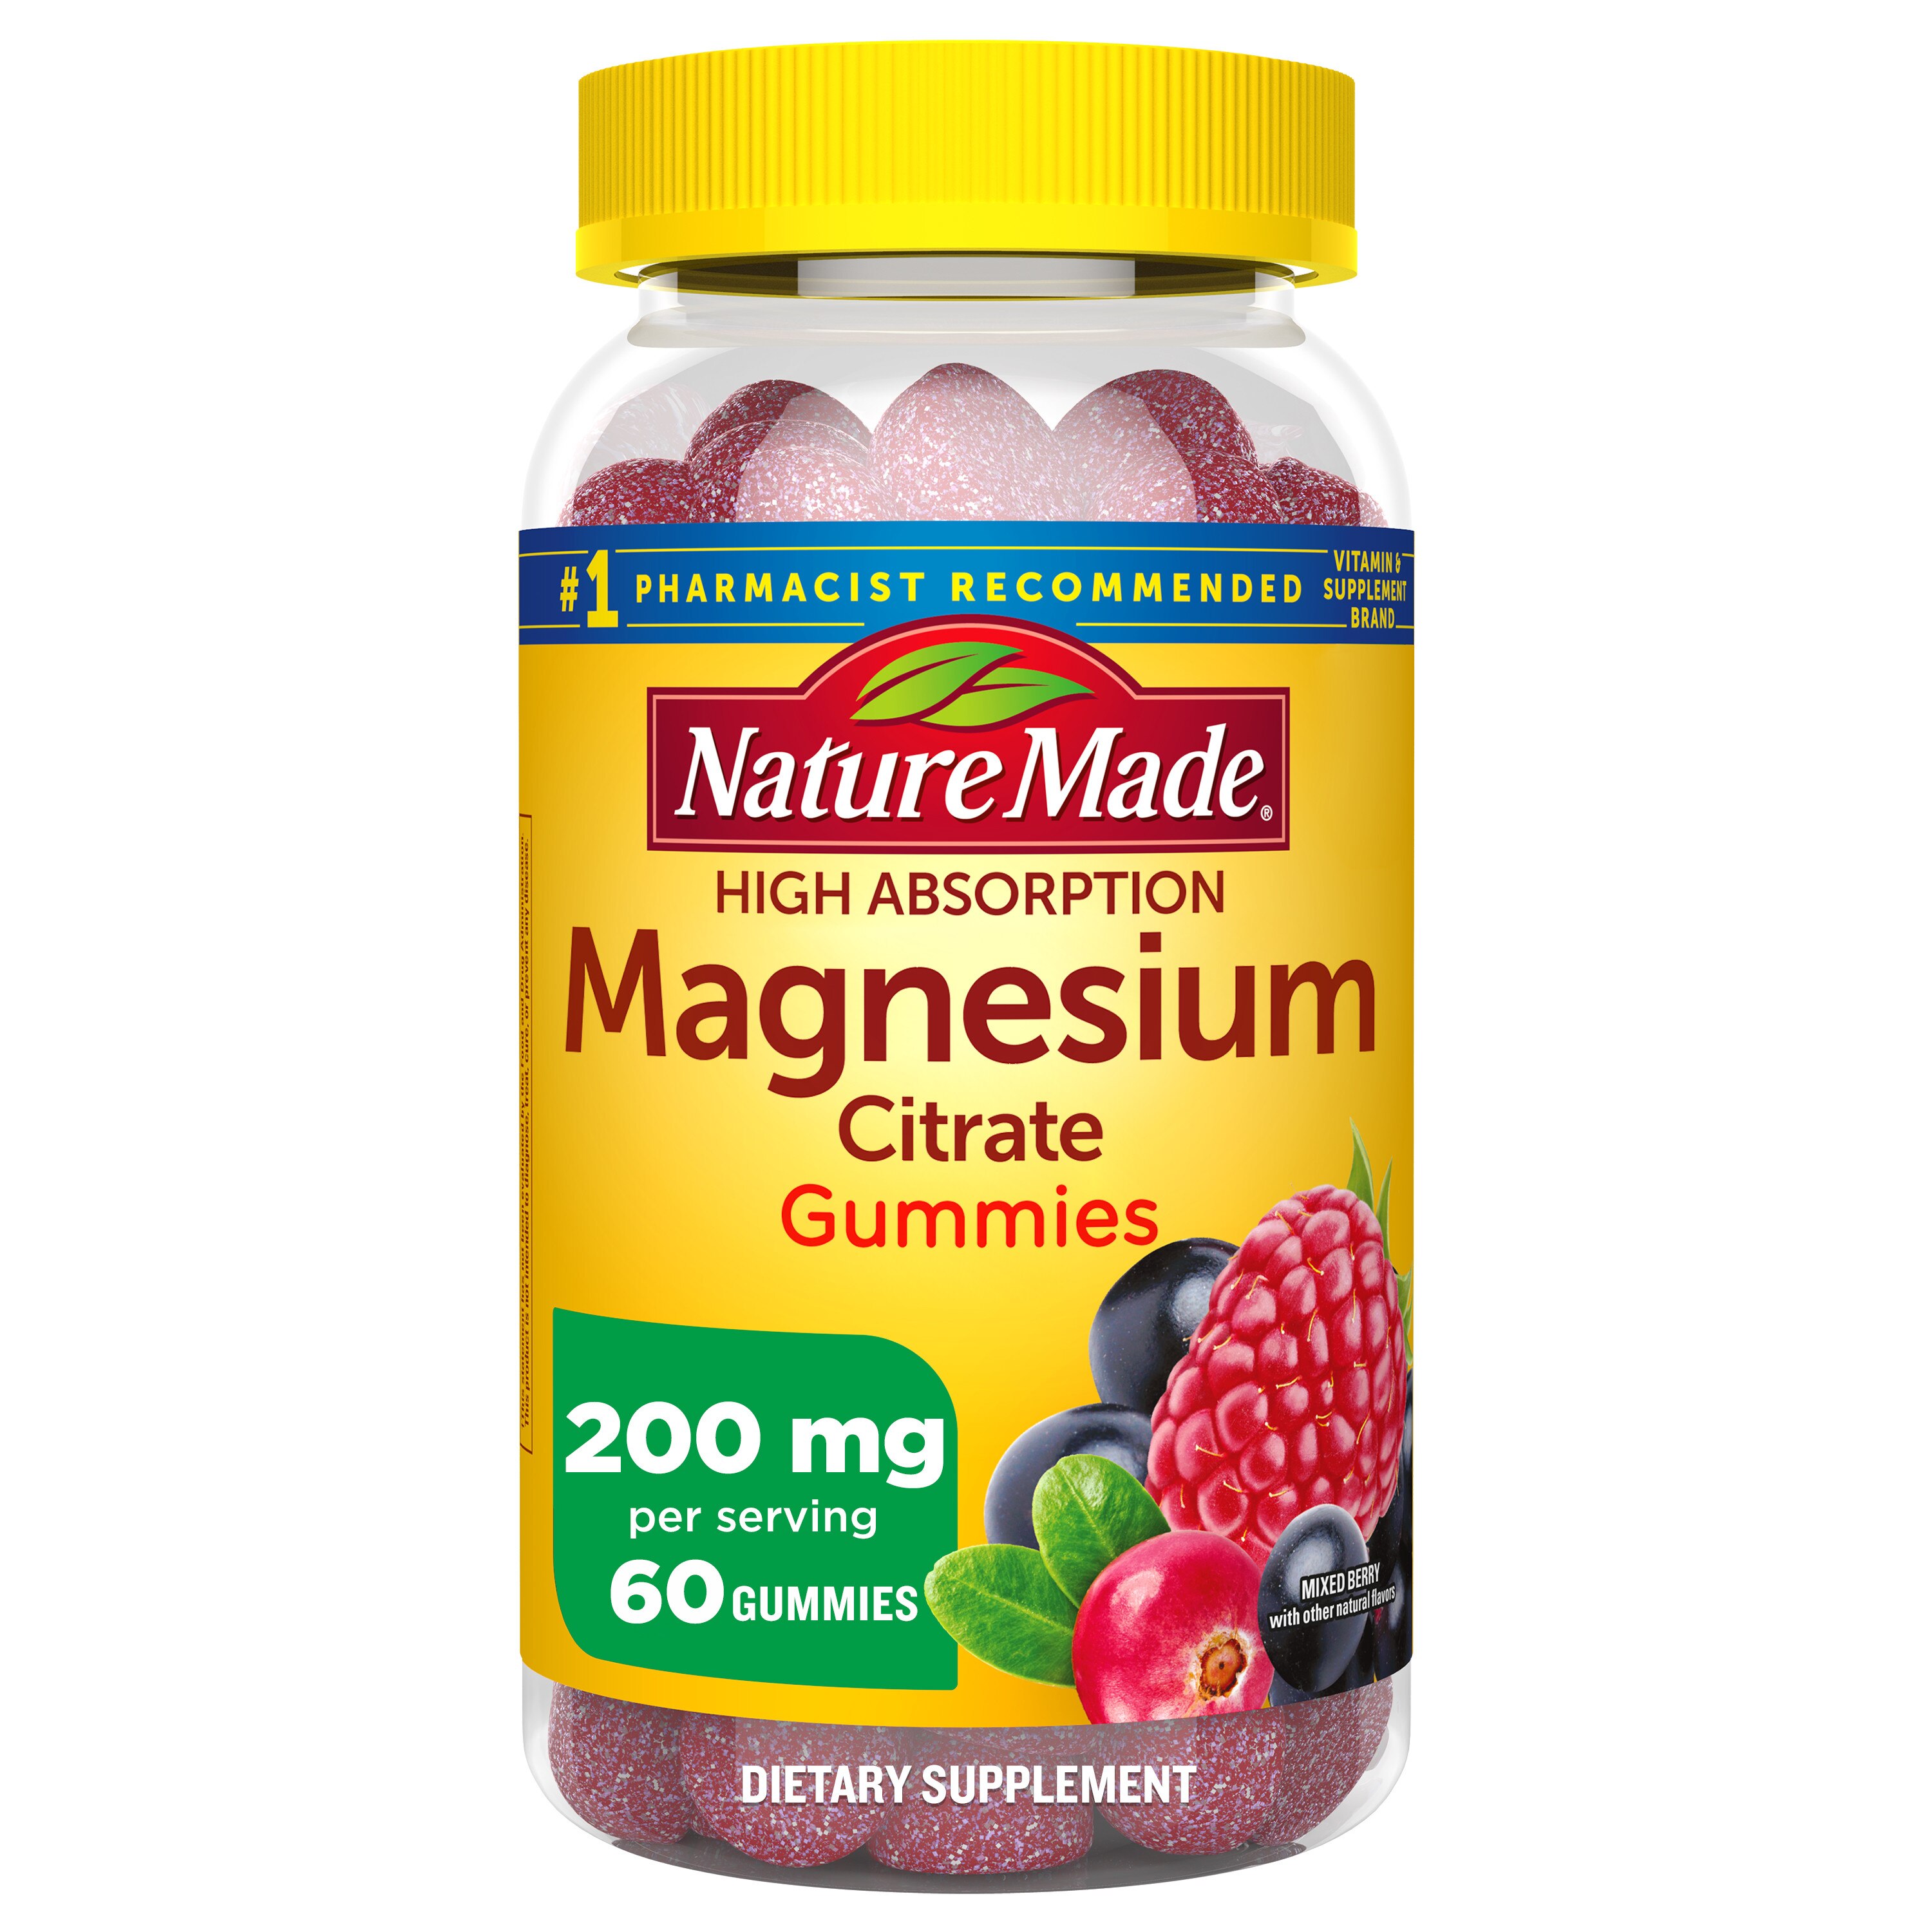 Nature Made High Absorption Magnesium Citrate 200 mg Gummies, 60 CT